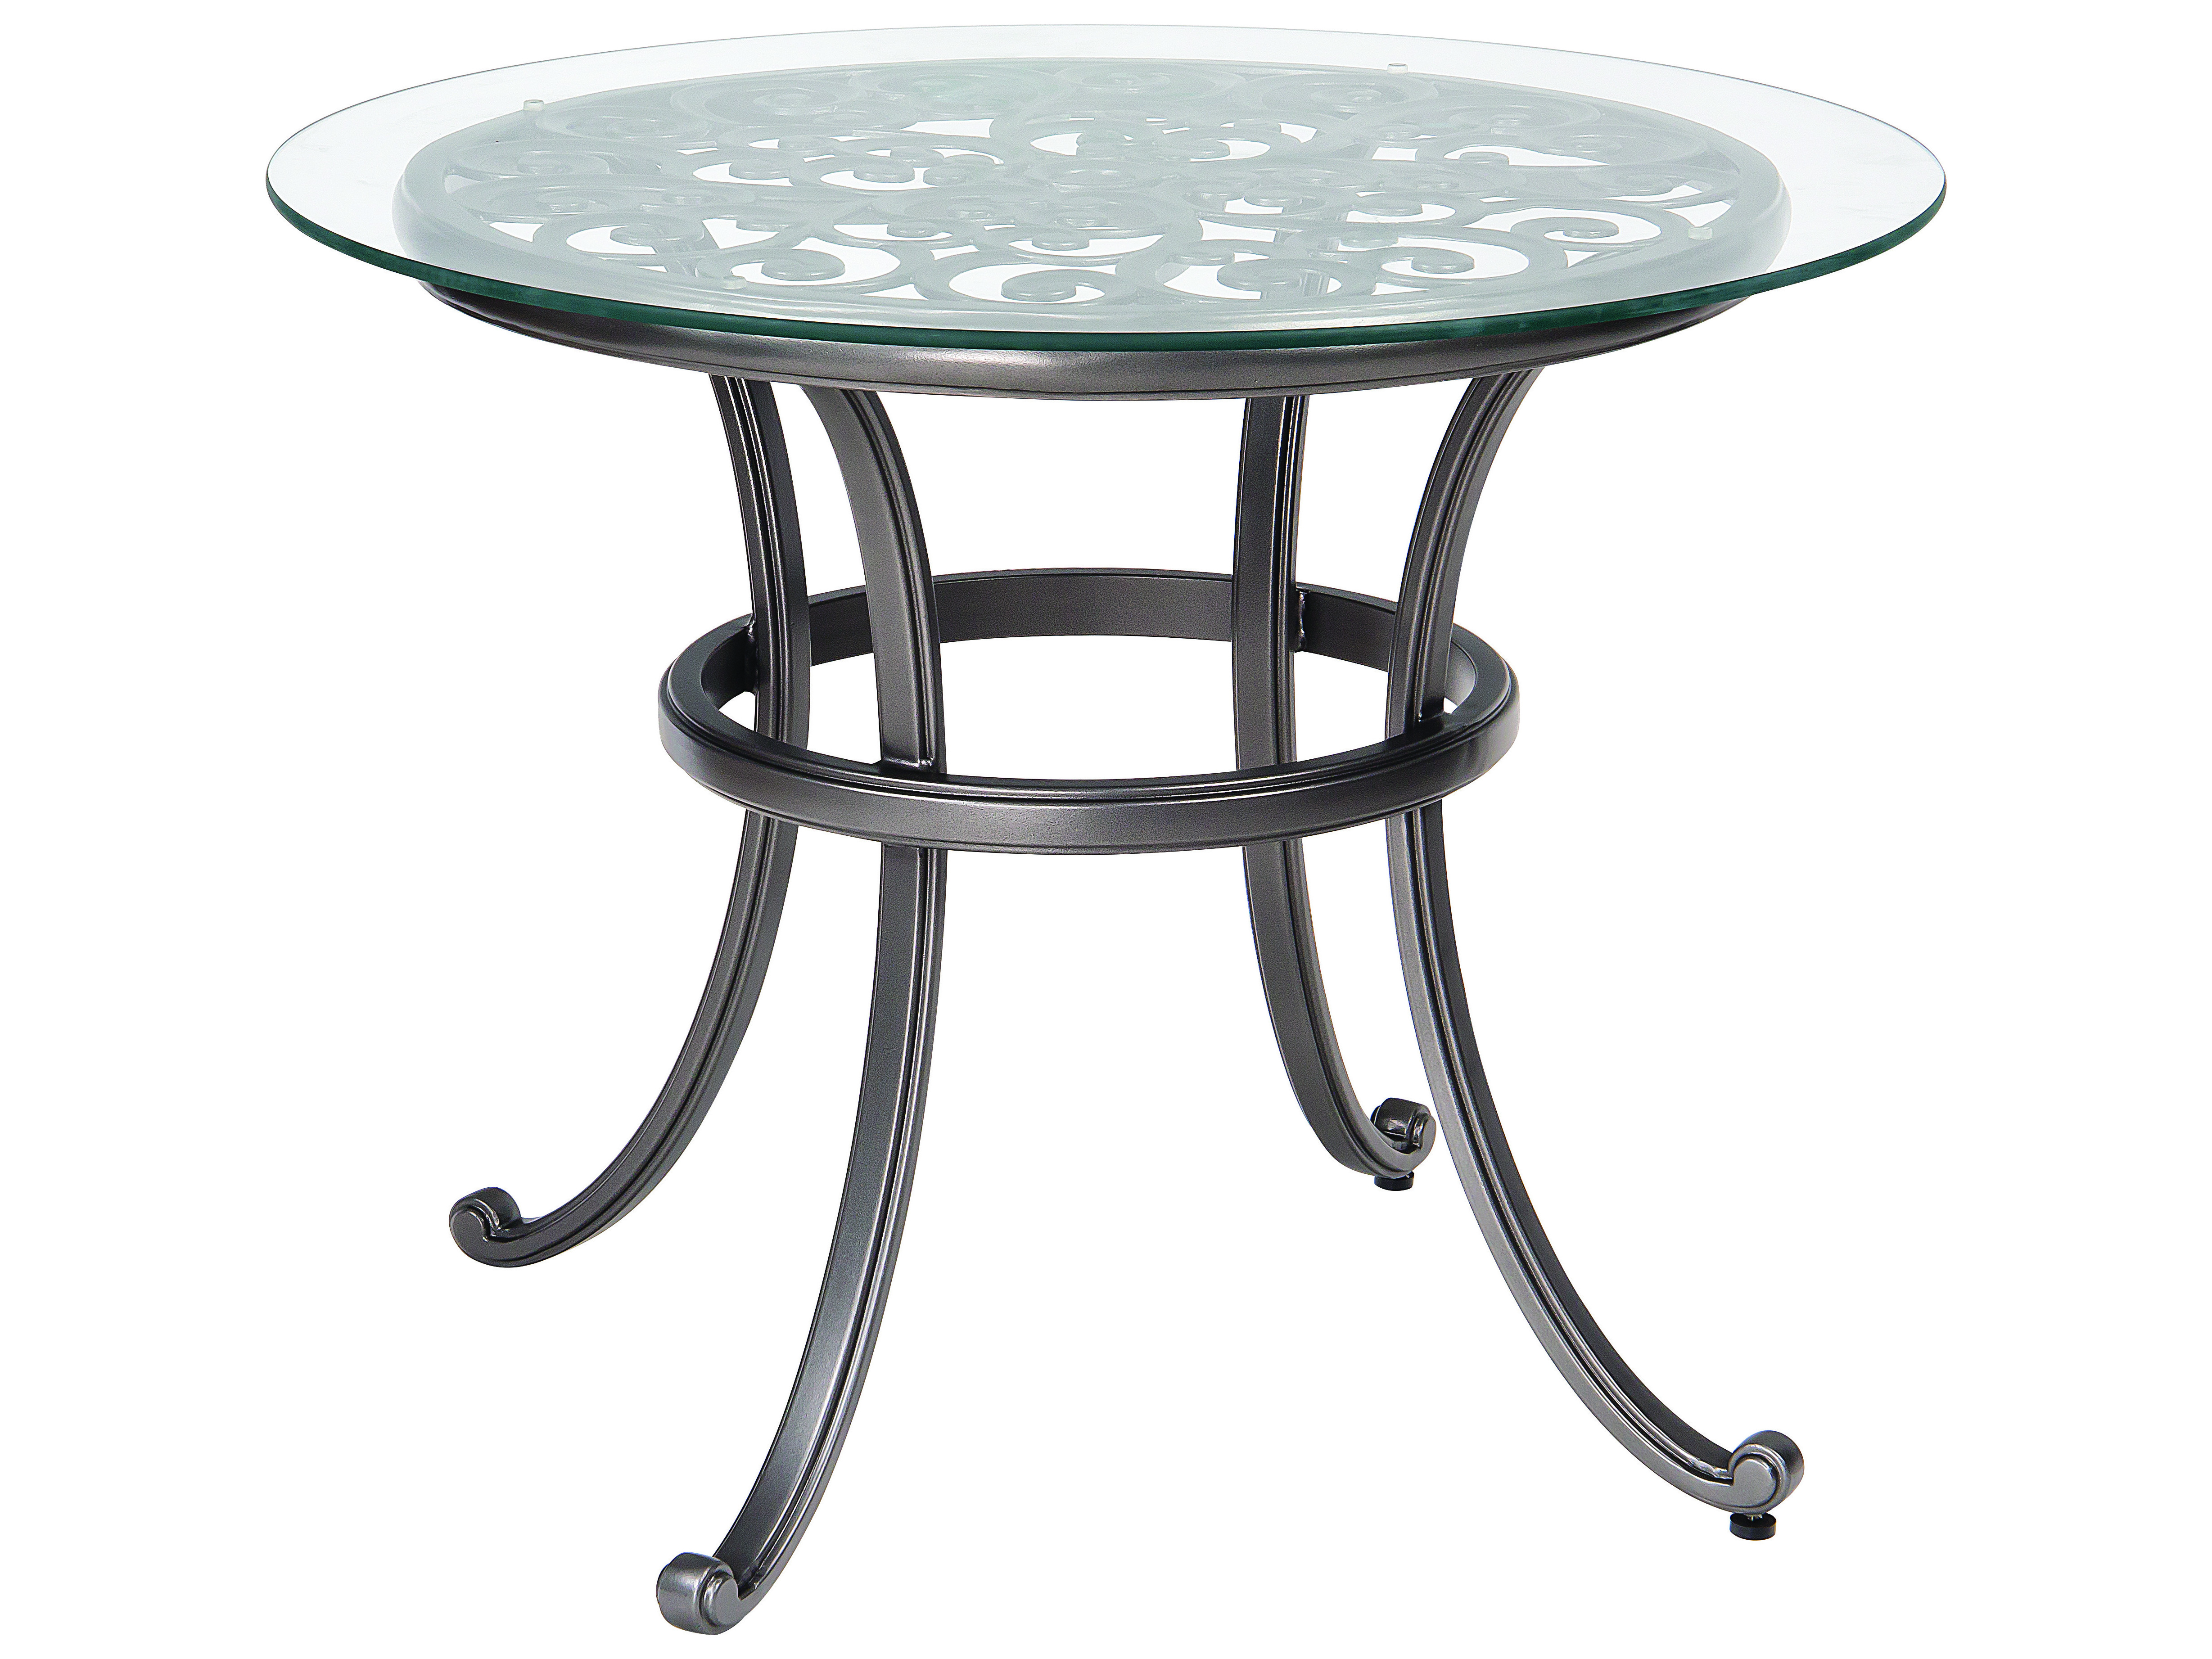 36 inch round glass top kitchen table